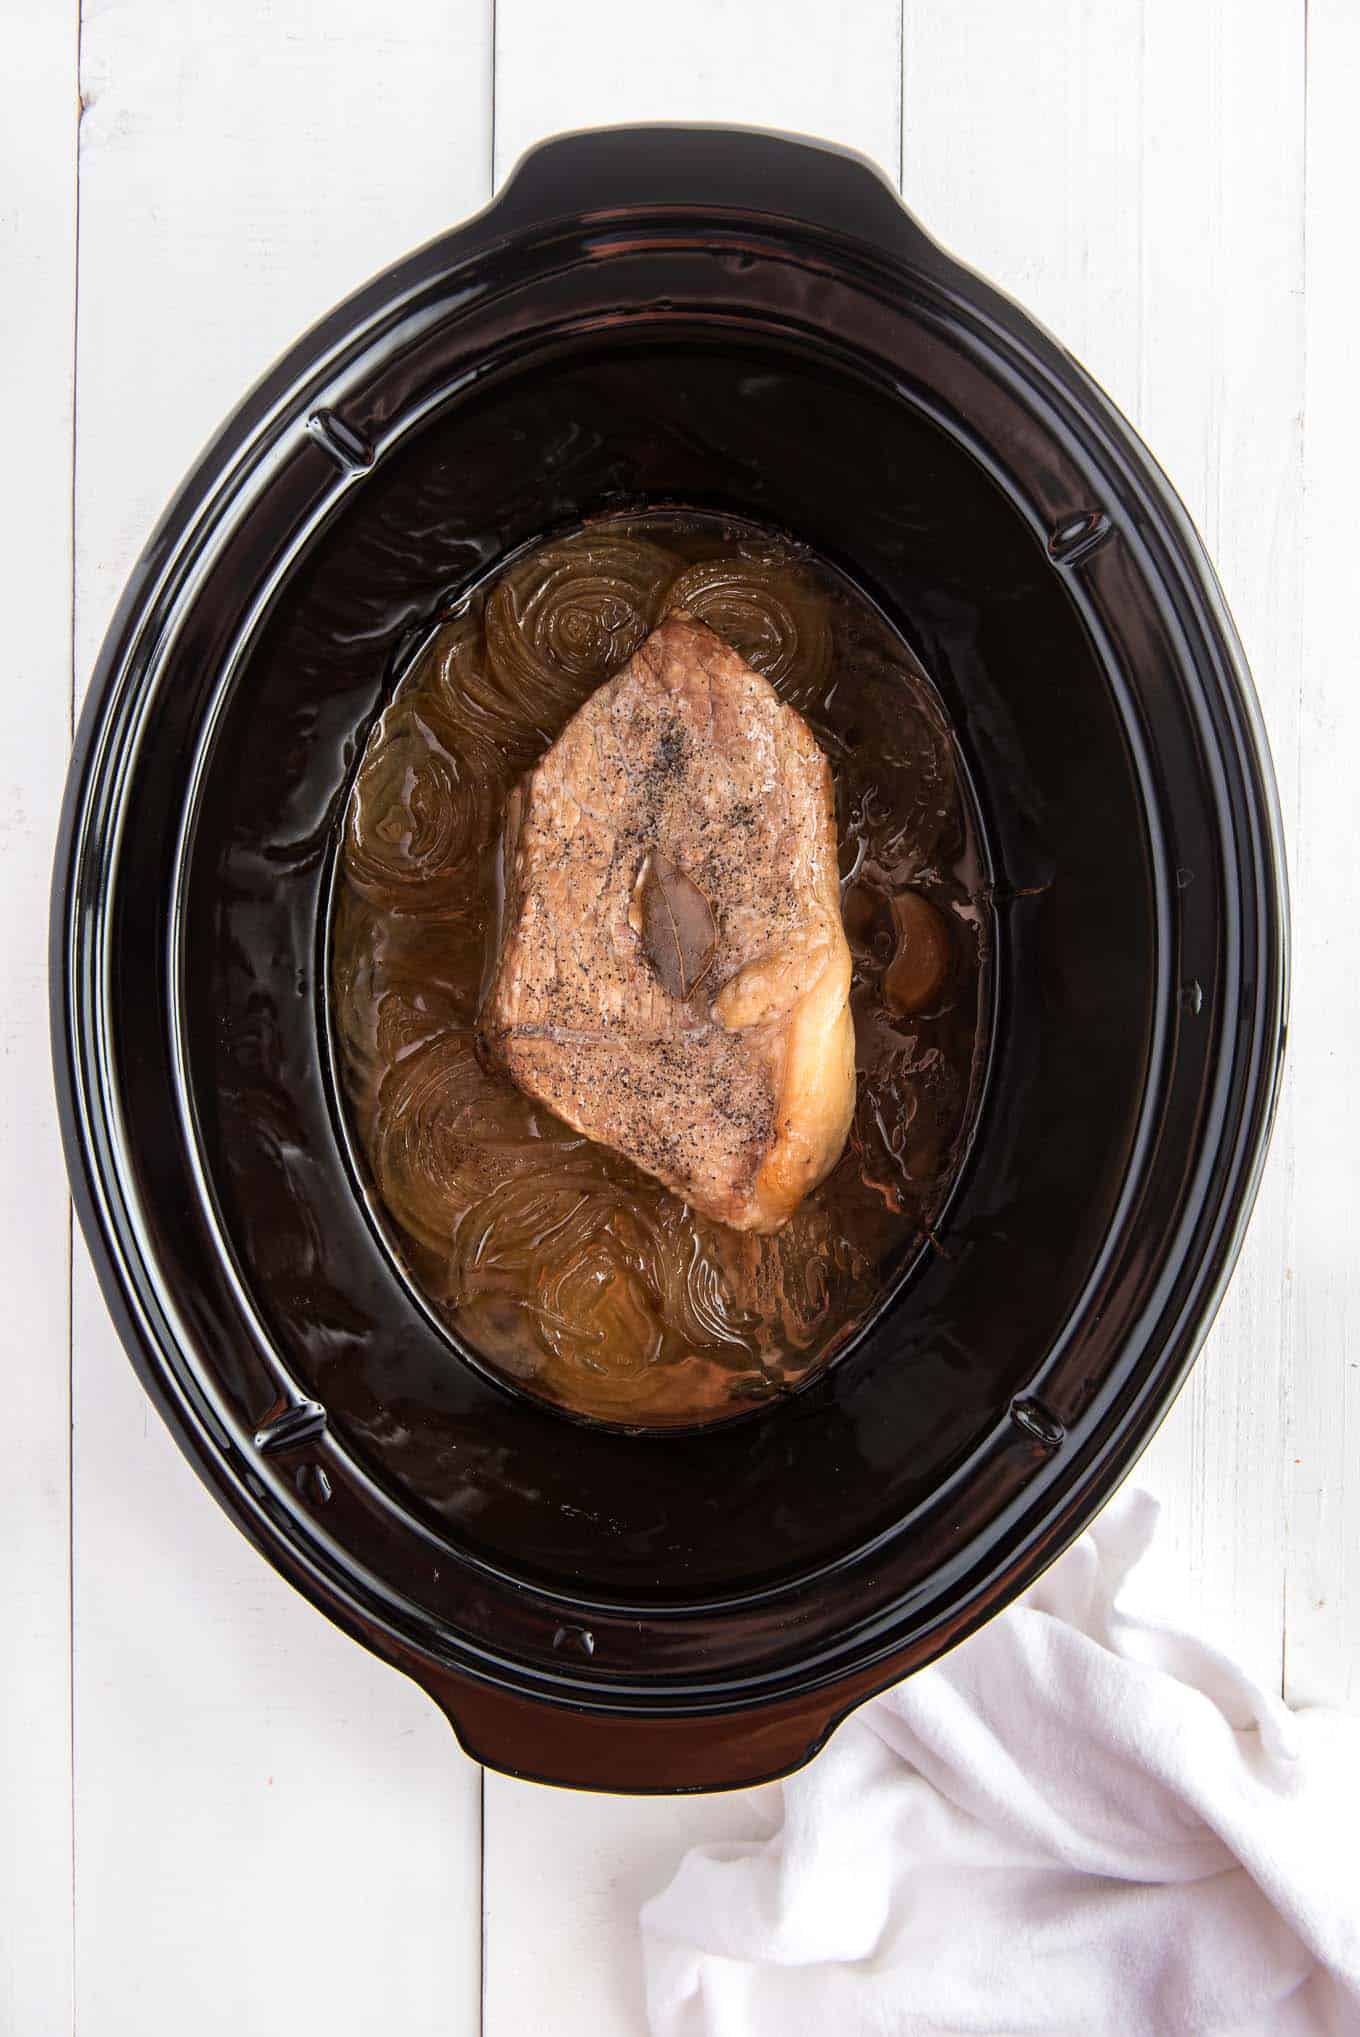 Beef roast in a slow cooker after cooking.